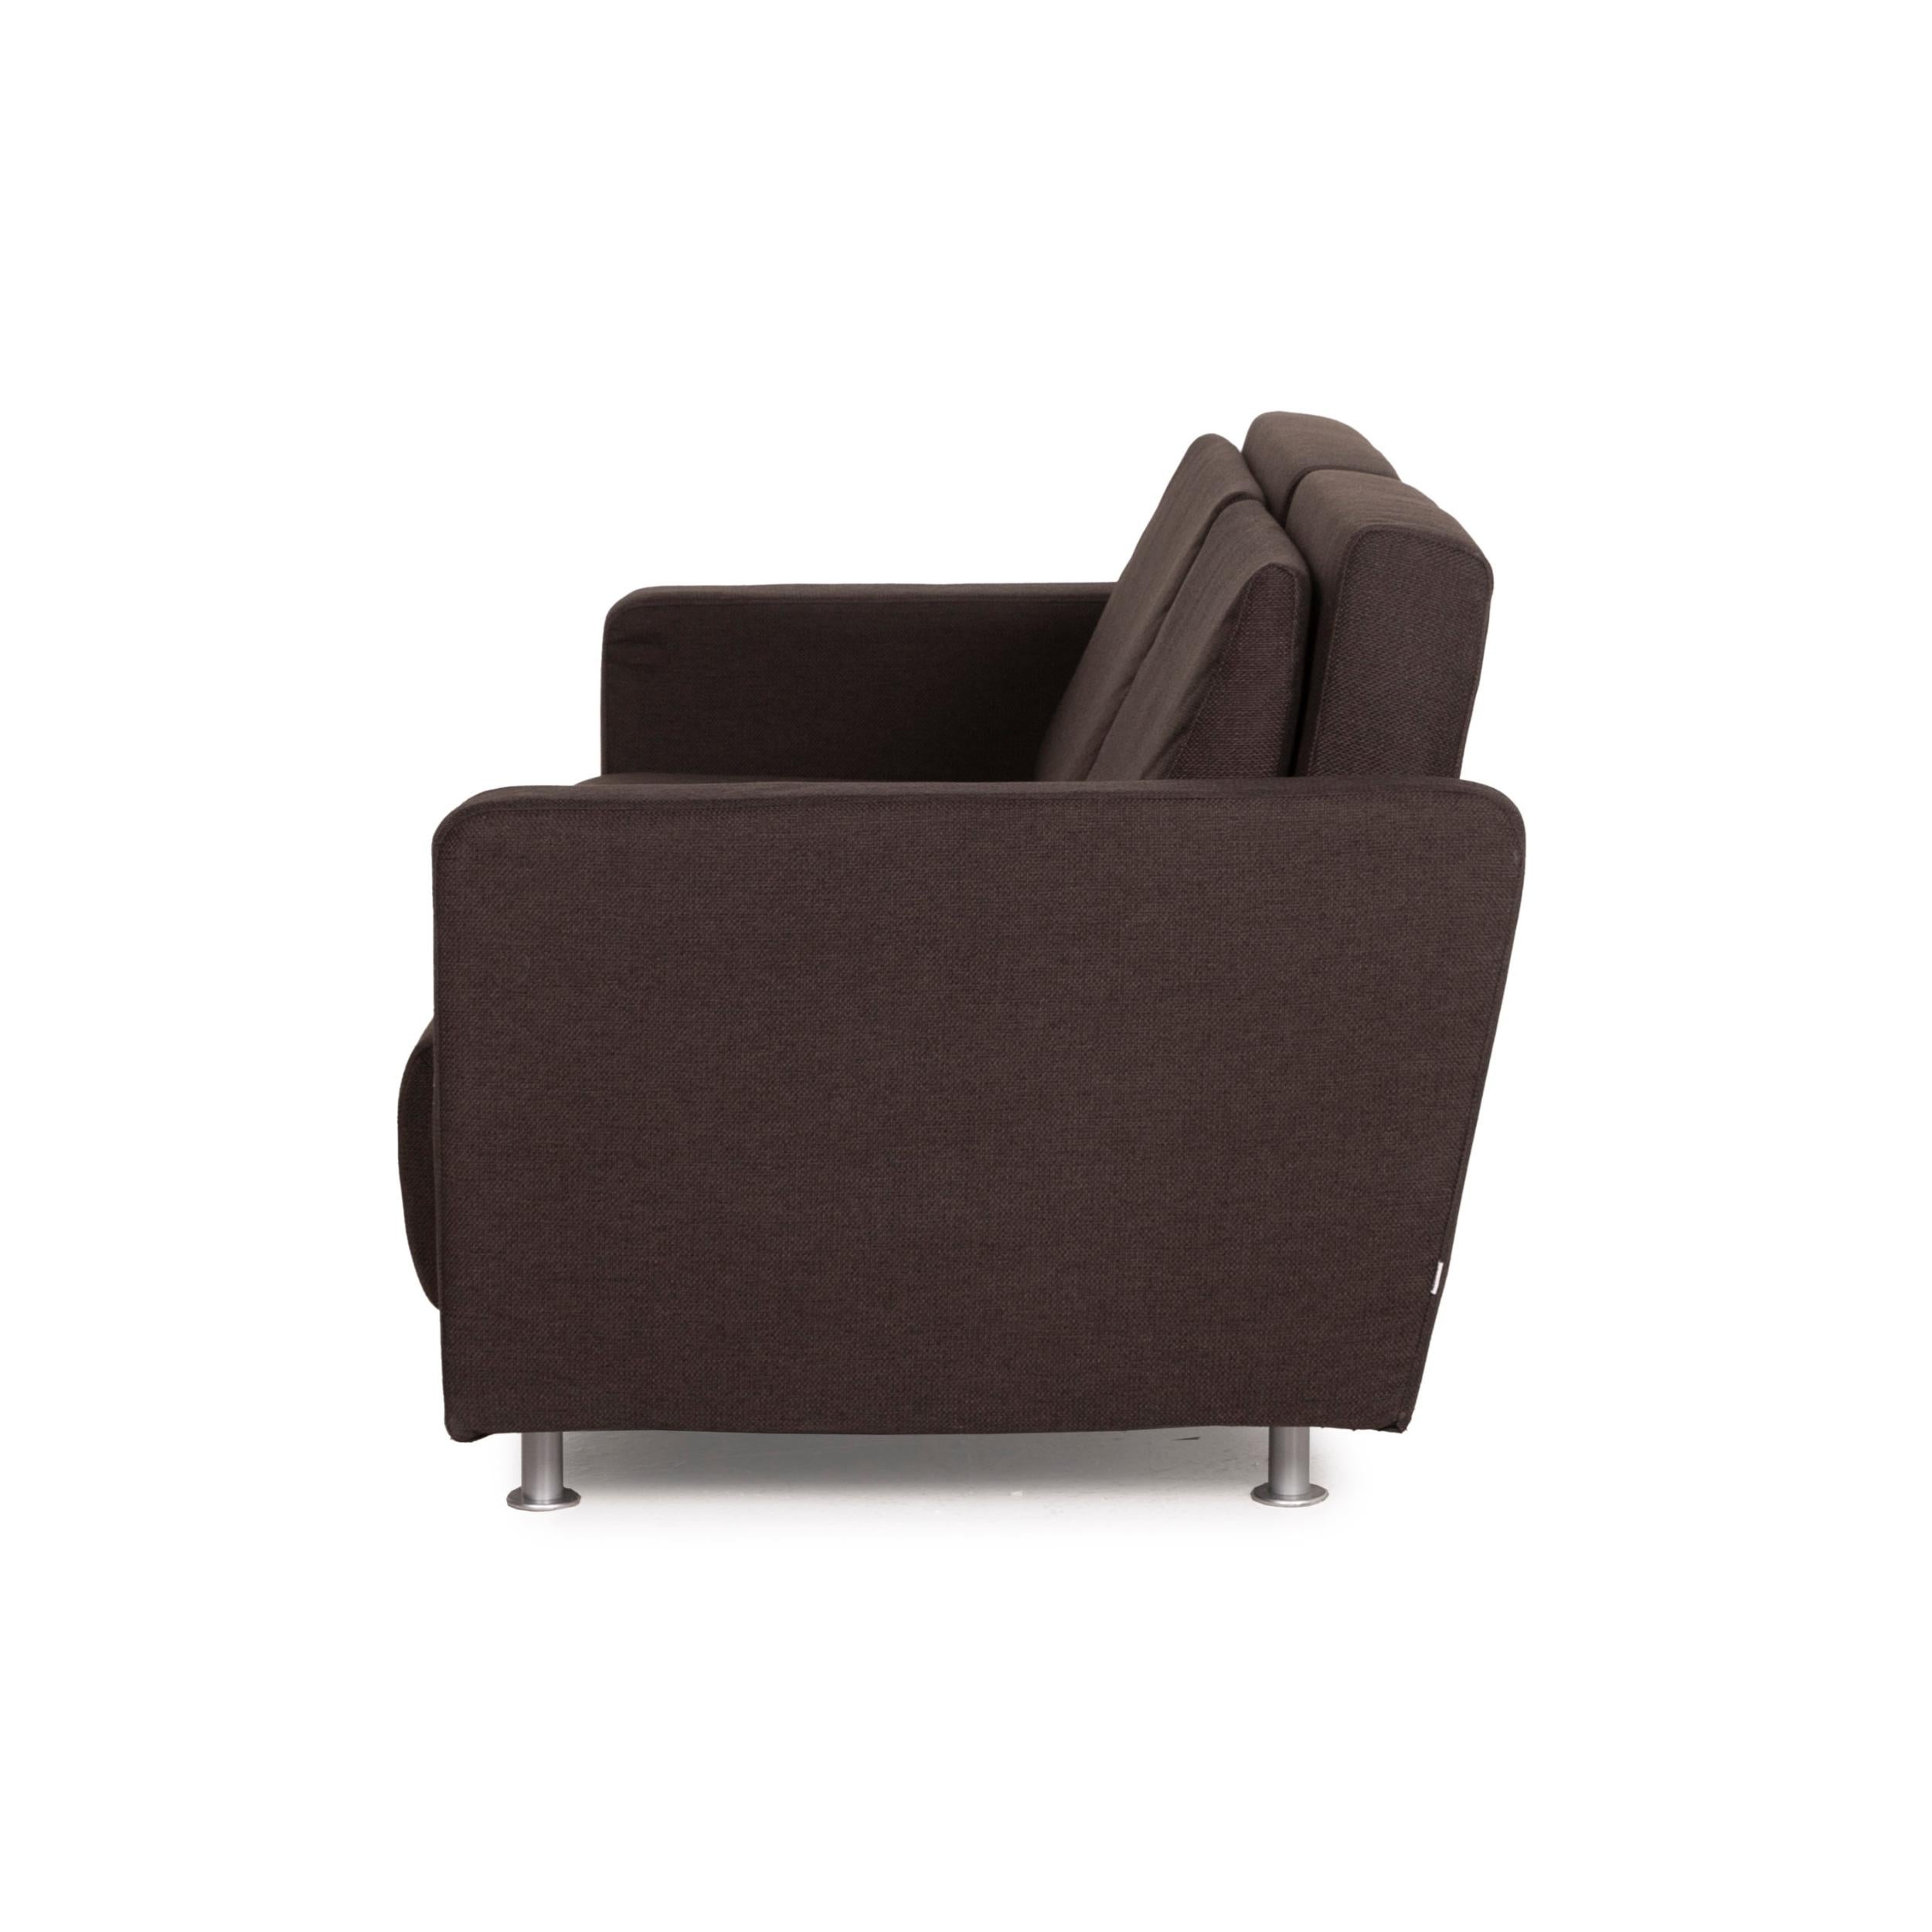 BoConcept Melo Fabric Sofa Brown Two-Seater Relax Function Sofa Bed Dark Brown 3